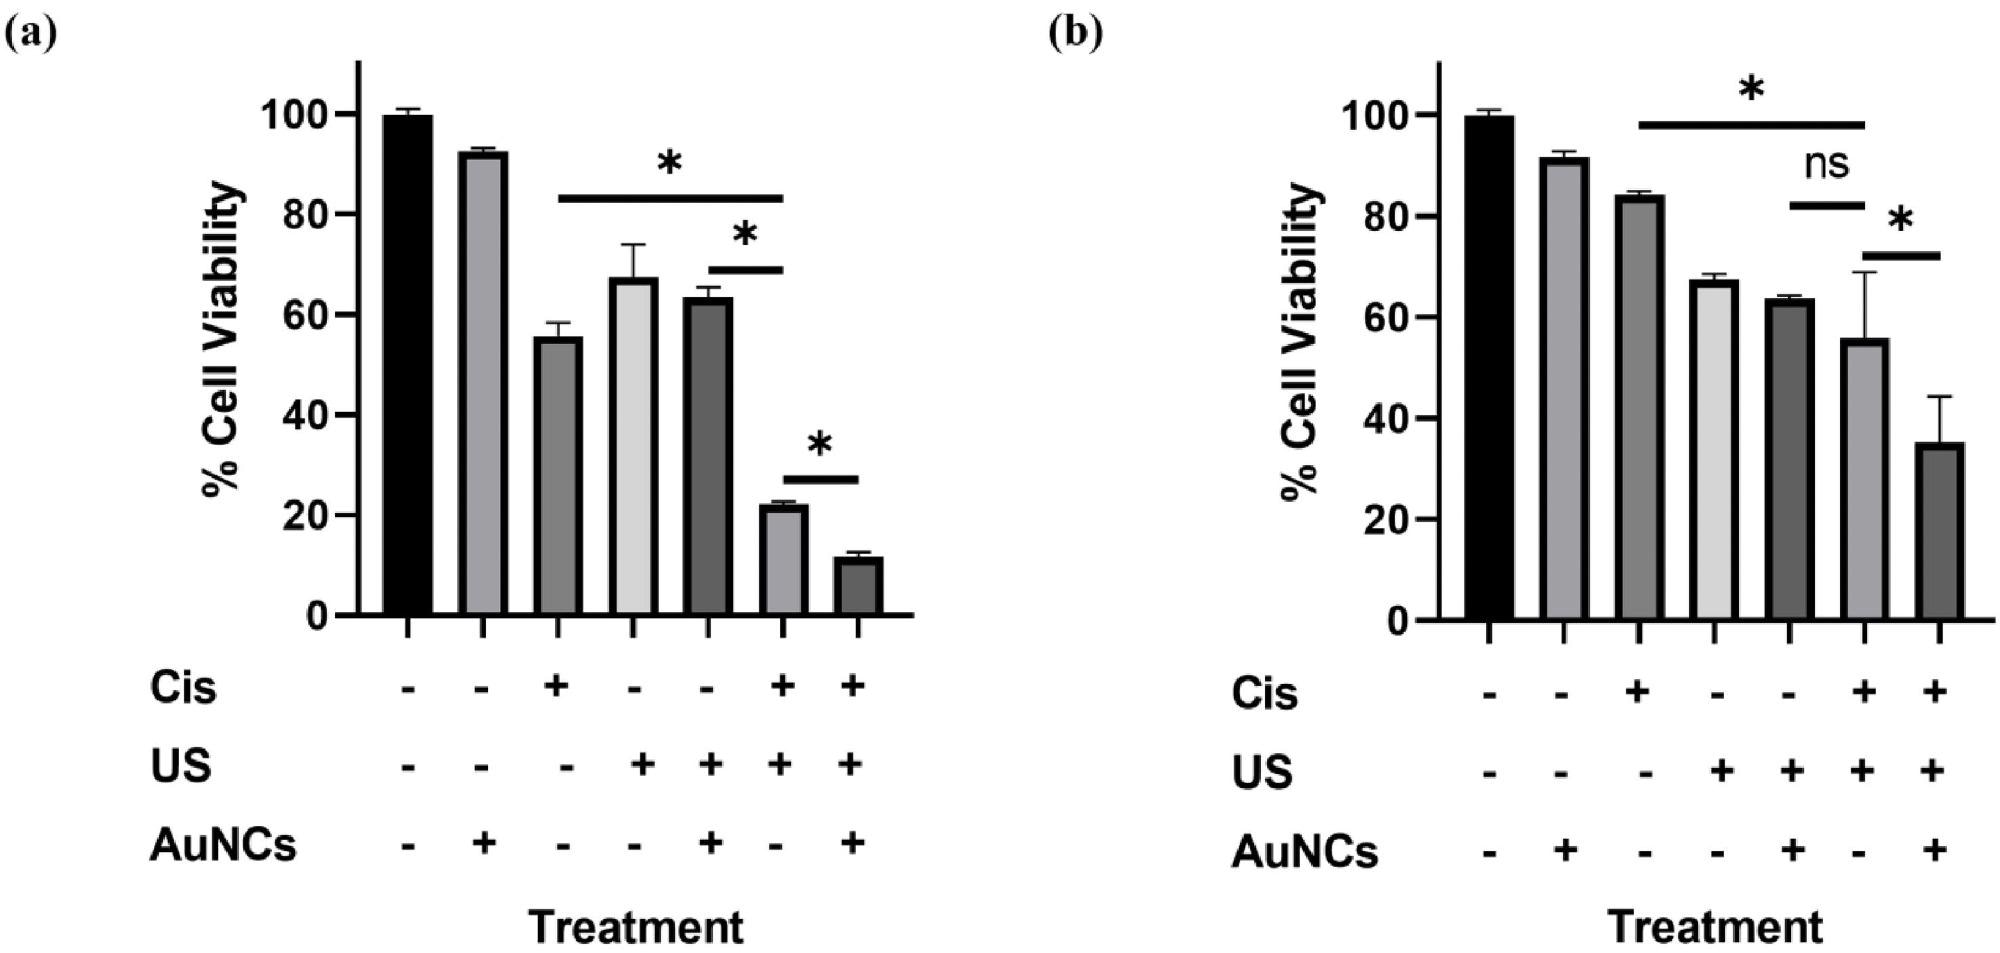 Effect of Cis, US, US+AuNCs, US + Cis, and US+AuNCs+Cis treatments on cell viability in A2780/A2780cis ovarian cancer cell lines. A2780(a)and A2780cis(b)ovarian cancer cells were treated separately with Cis, US, US+AuNCs, US + Cis, and US+AuNCs+Cis combination therapy, and cell viability was analyzed with resazurin 2 days after treatments. (*p-values<0.05)